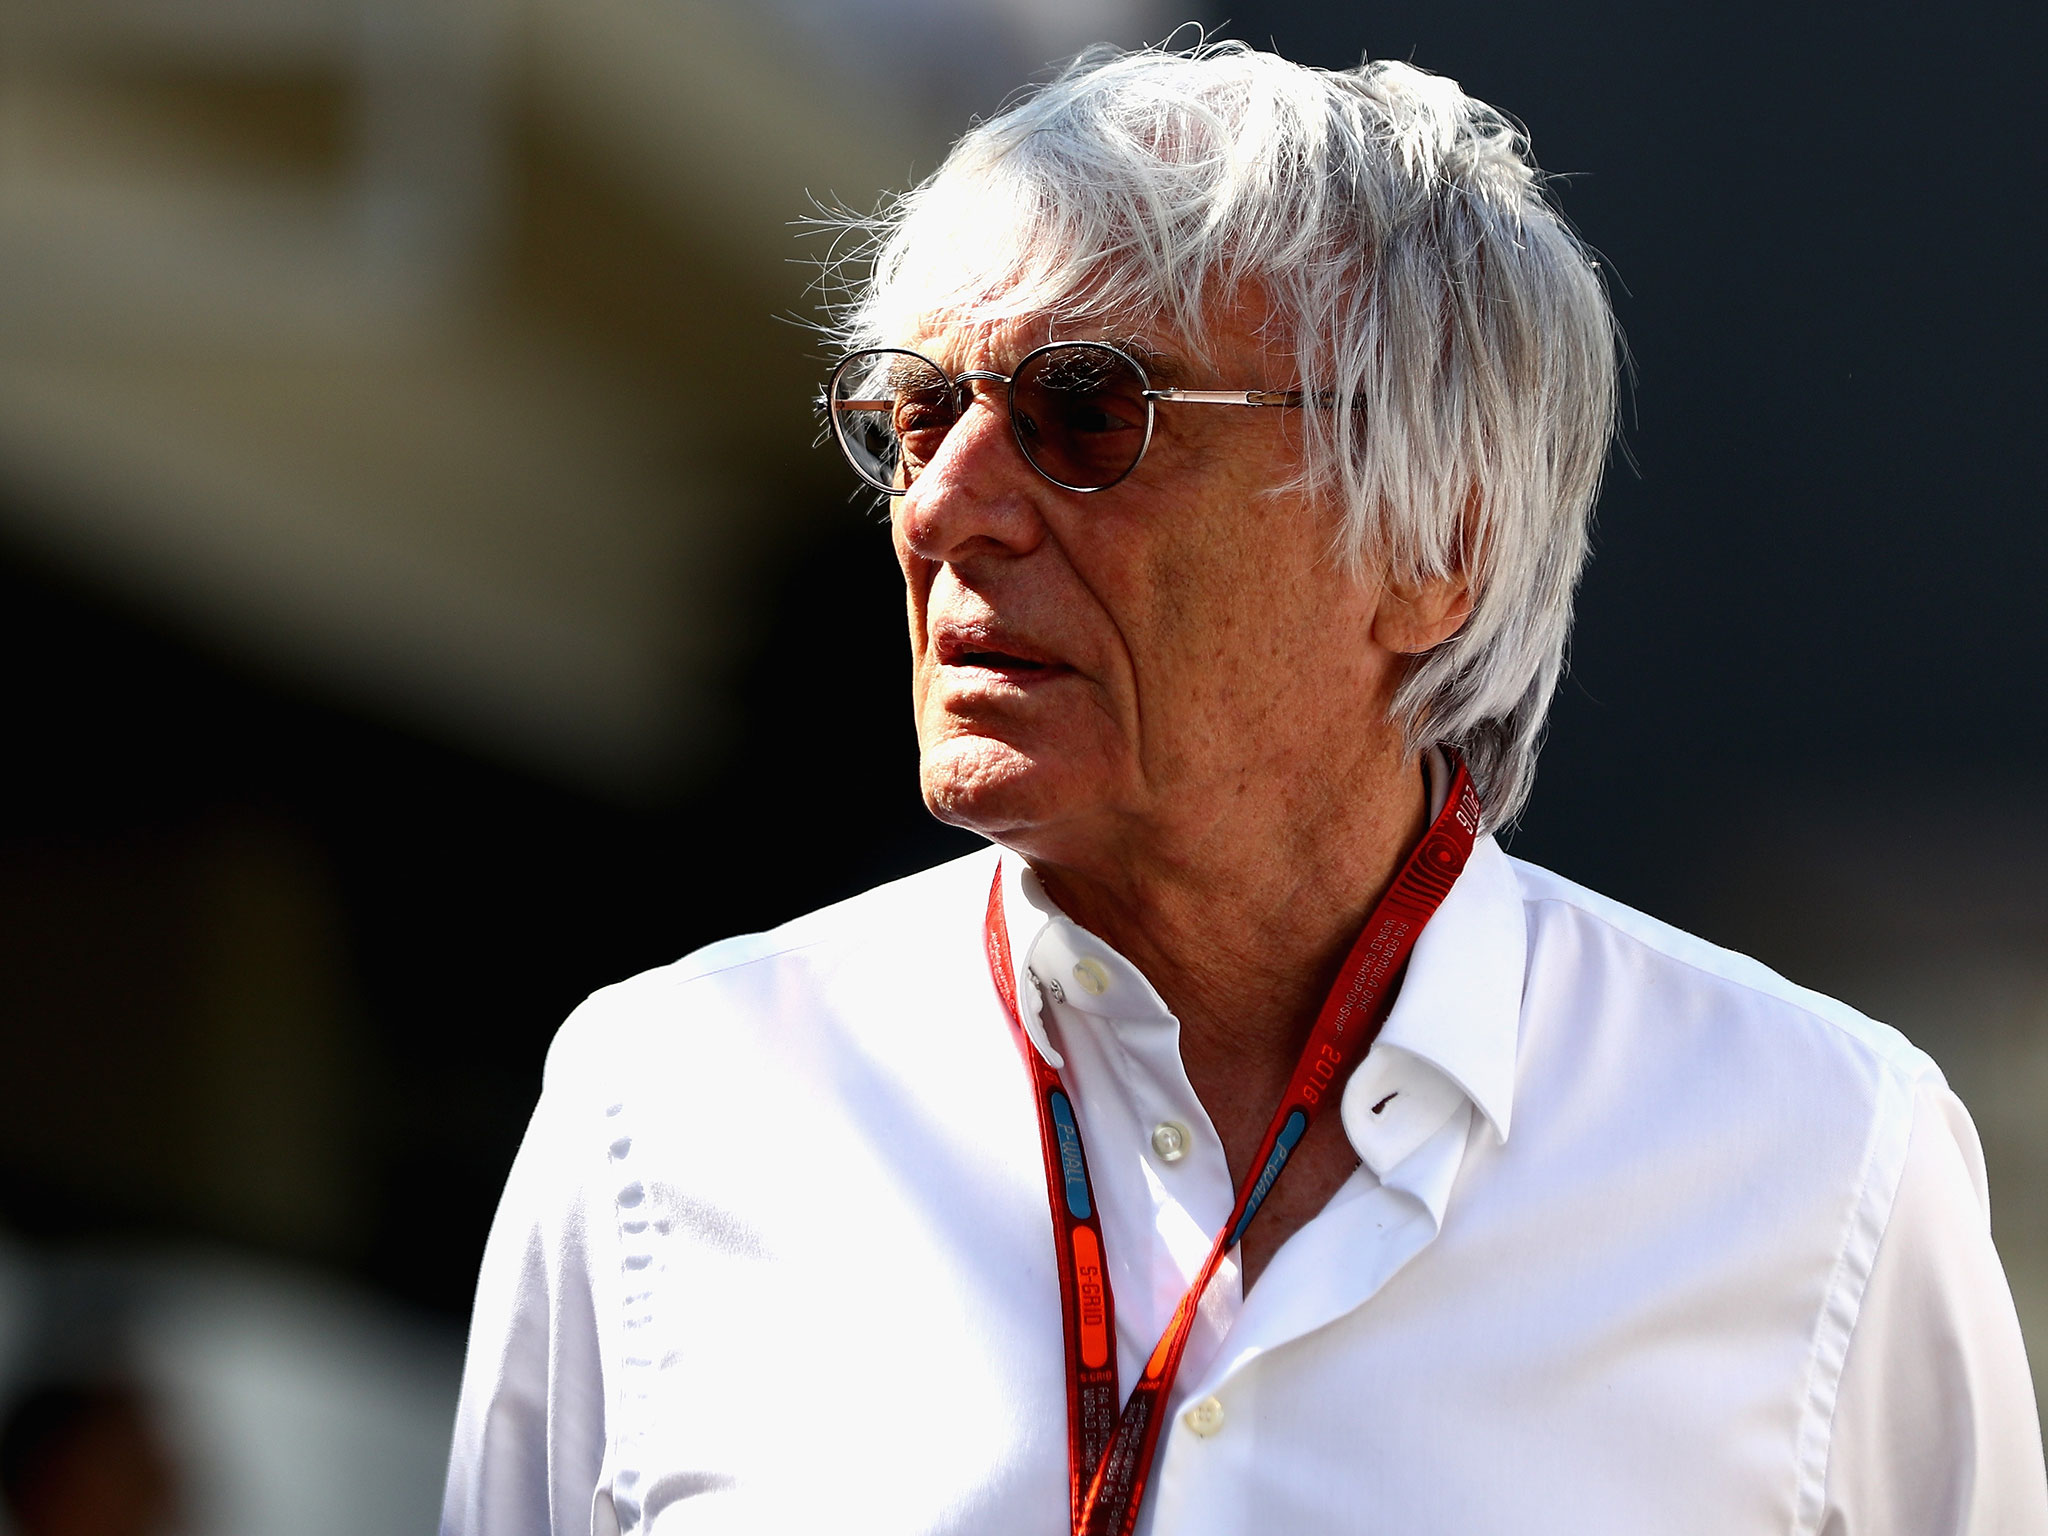 F1: Bernie Ecclestone plays down Singapore Grand Prix fears after Malaysia cancel race from 2019